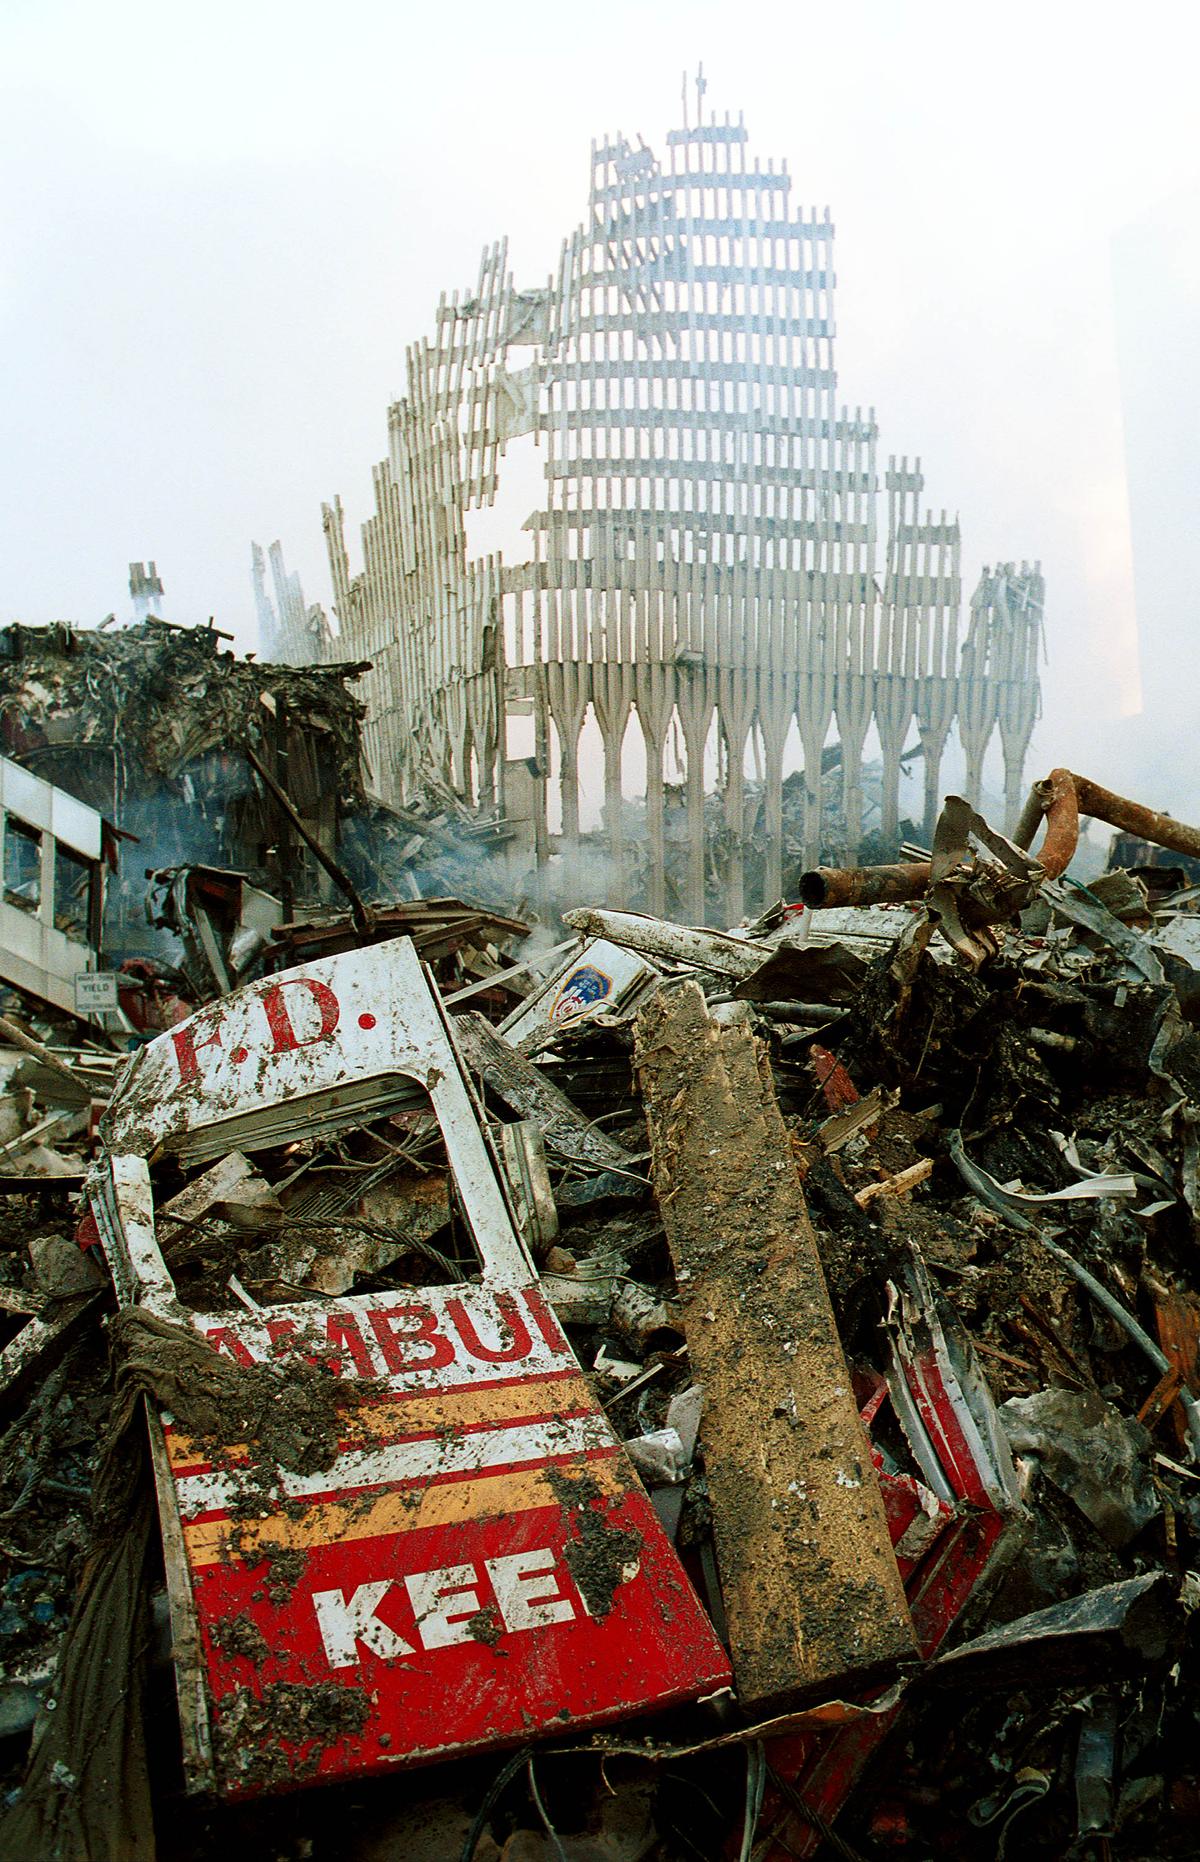 Remnants of a New York City Fire Department vehicle lie in the wreckage of the World Trade Center in New York City on Sept. 13, 2001, two days after the twin towers were destroyed when two hit by two hijacked passenger jets. (Chris Hondros/Getty Images)